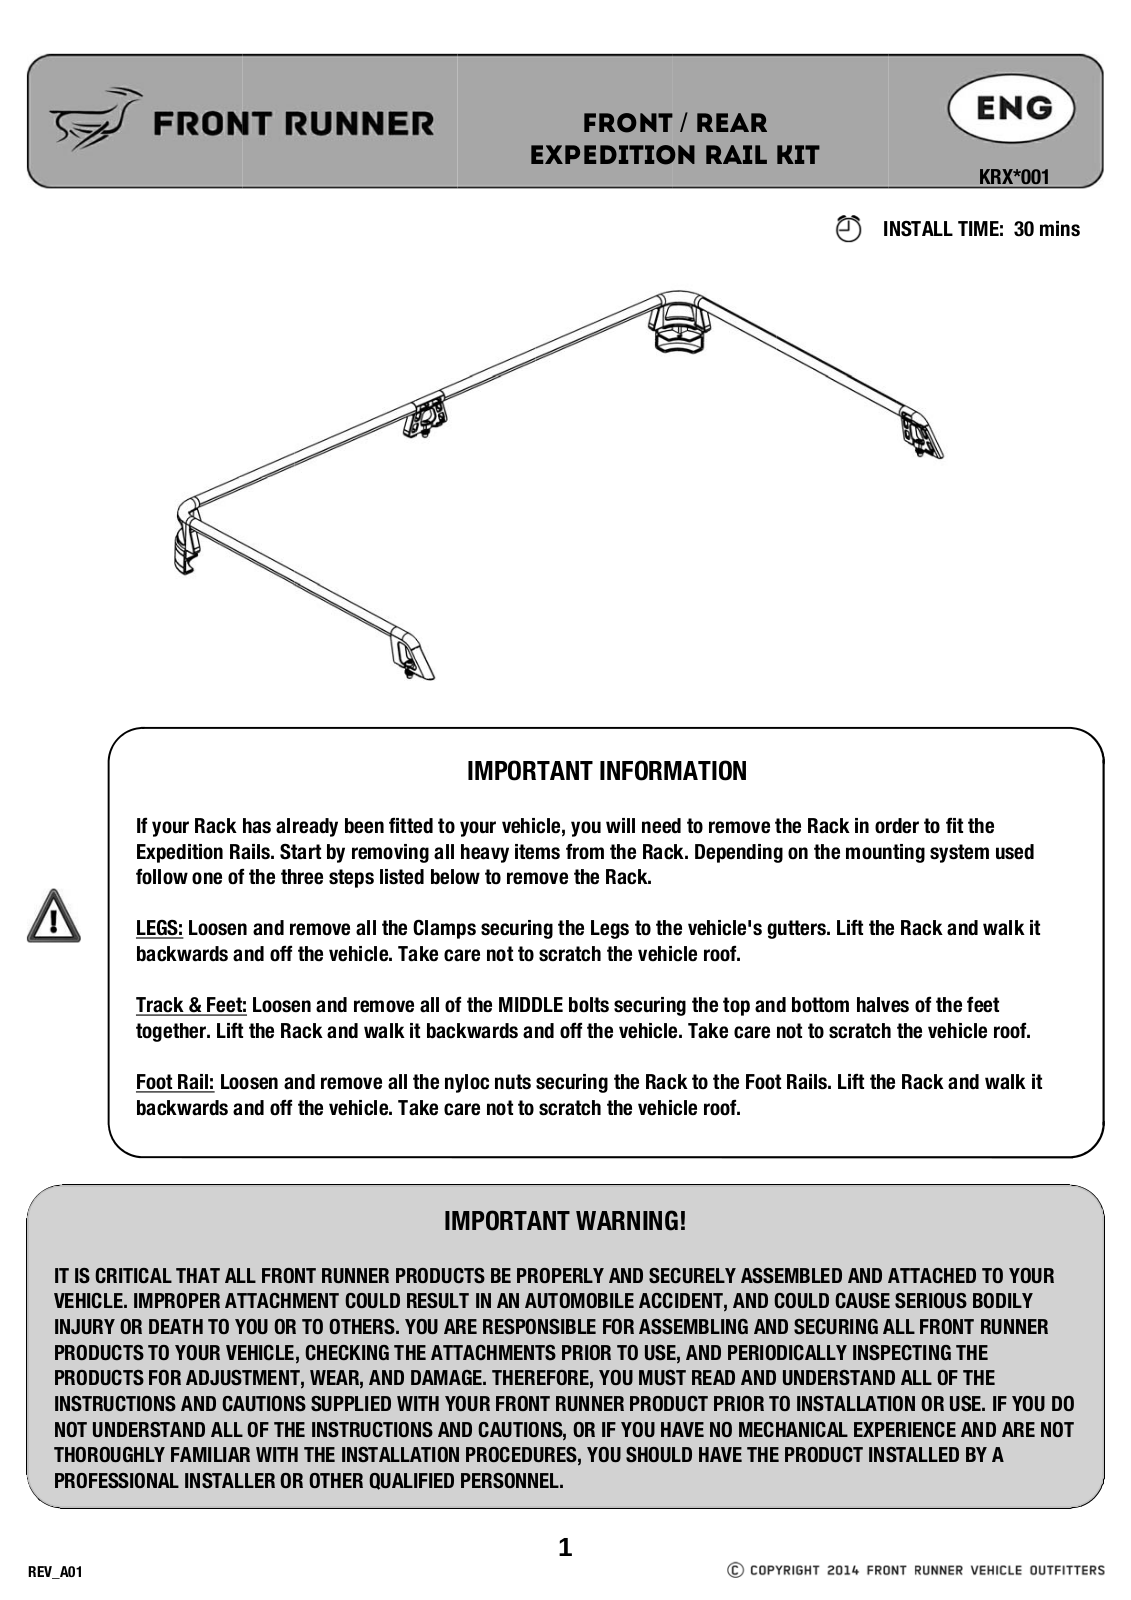 Installation instructions for KRXM001